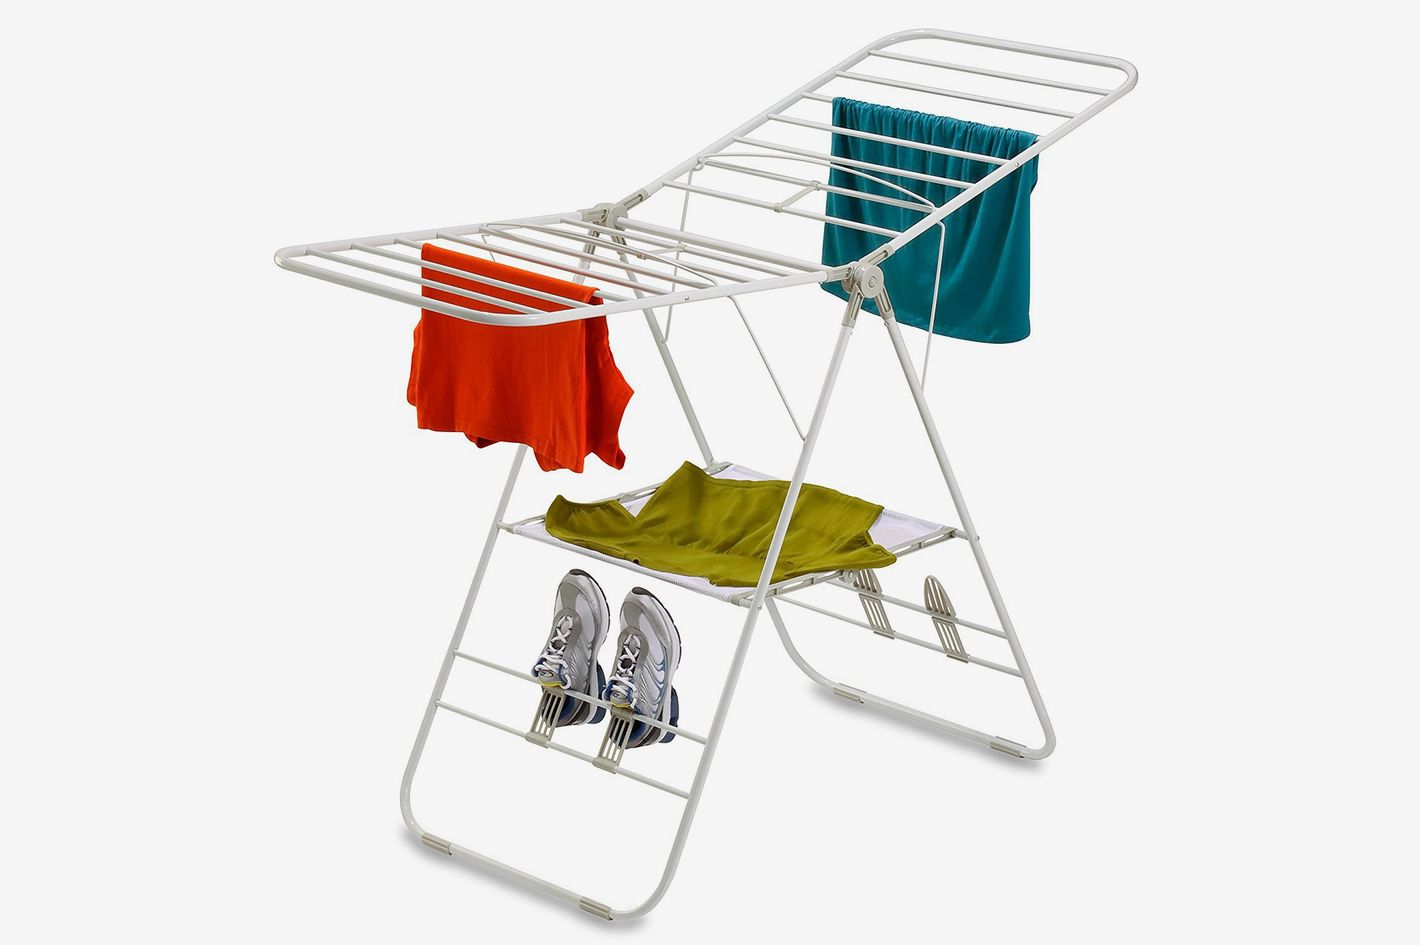 2x Folding Clothes Hanger Drying Rack Wall Mounted Holder Dryer Retractable USA